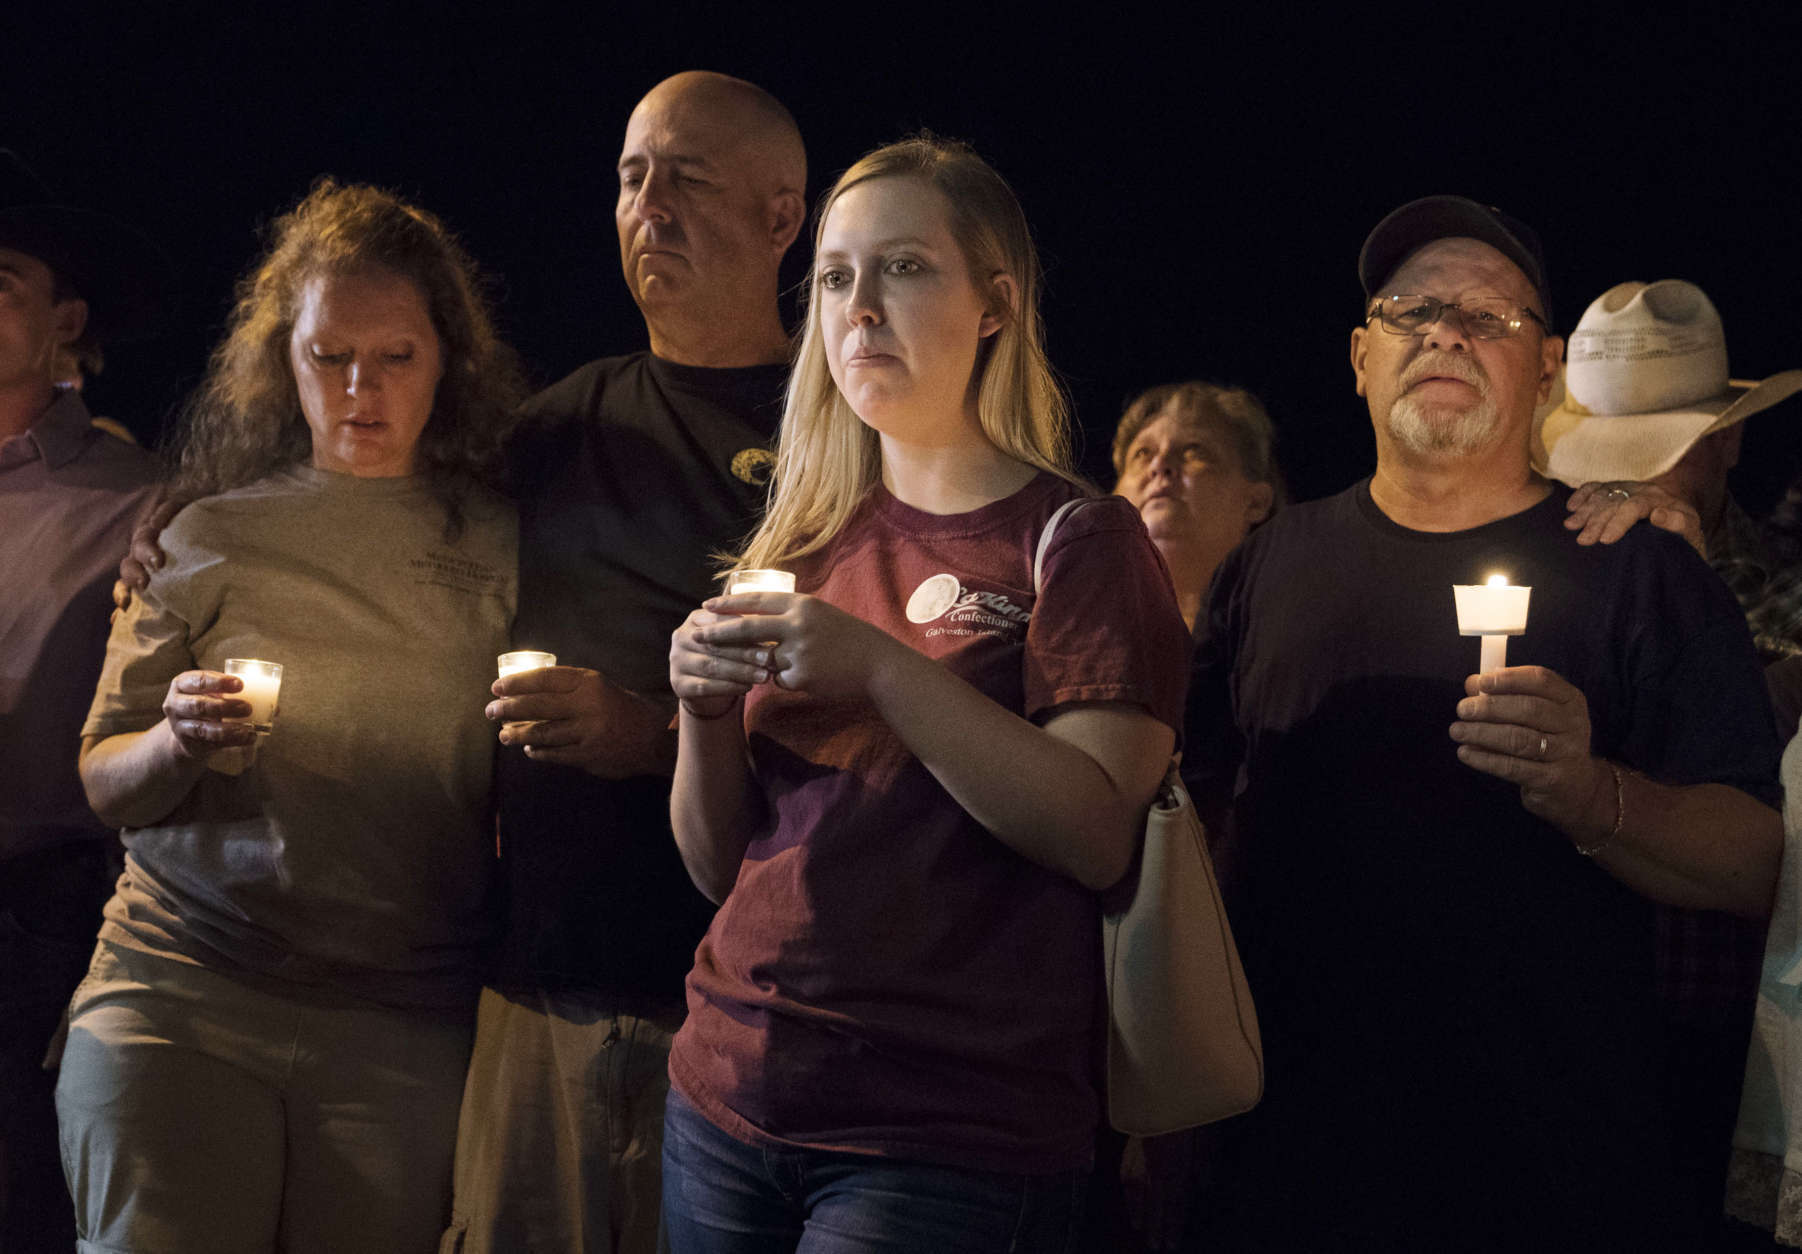 Mourners participate in a candlelight vigil held for the victims of a fatal shooting at the First Baptist Church of Sutherland Springs, Sunday, Nov. 5, 2017, in Sutherland Springs, Texas. (AP Photo/Darren Abate)